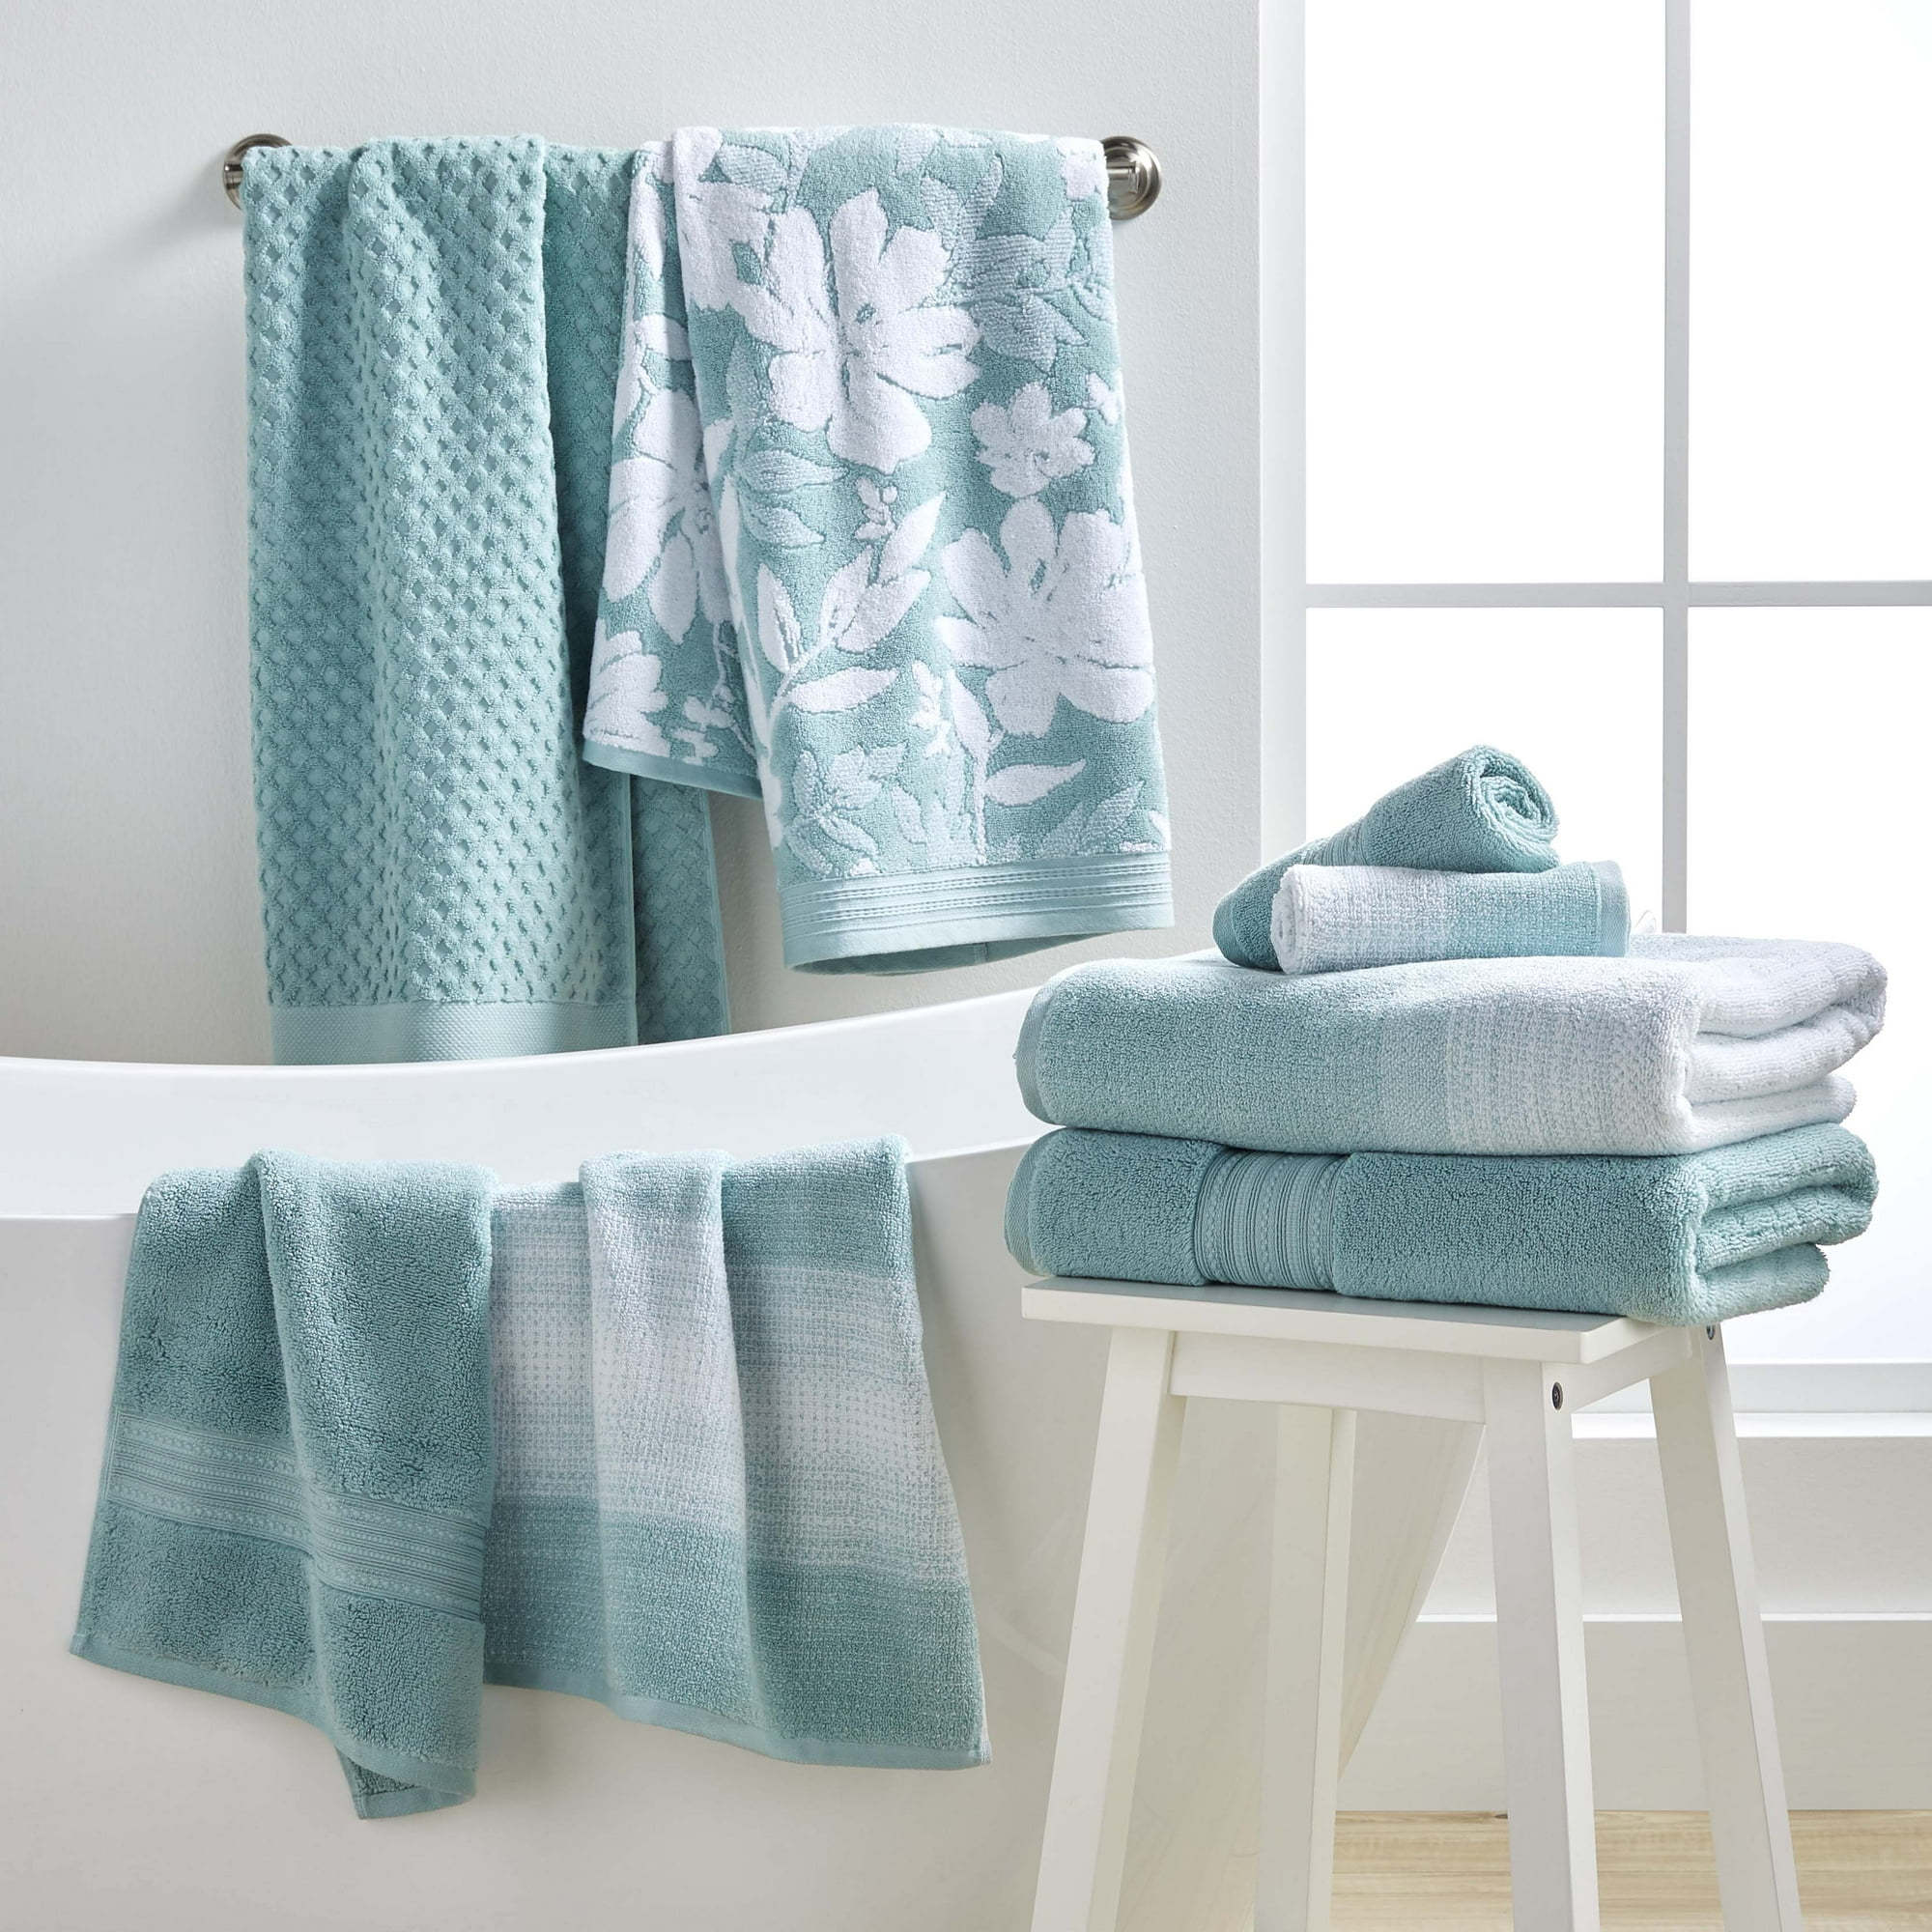 Aquifer towels hanging up by a tub and folded on a white stool